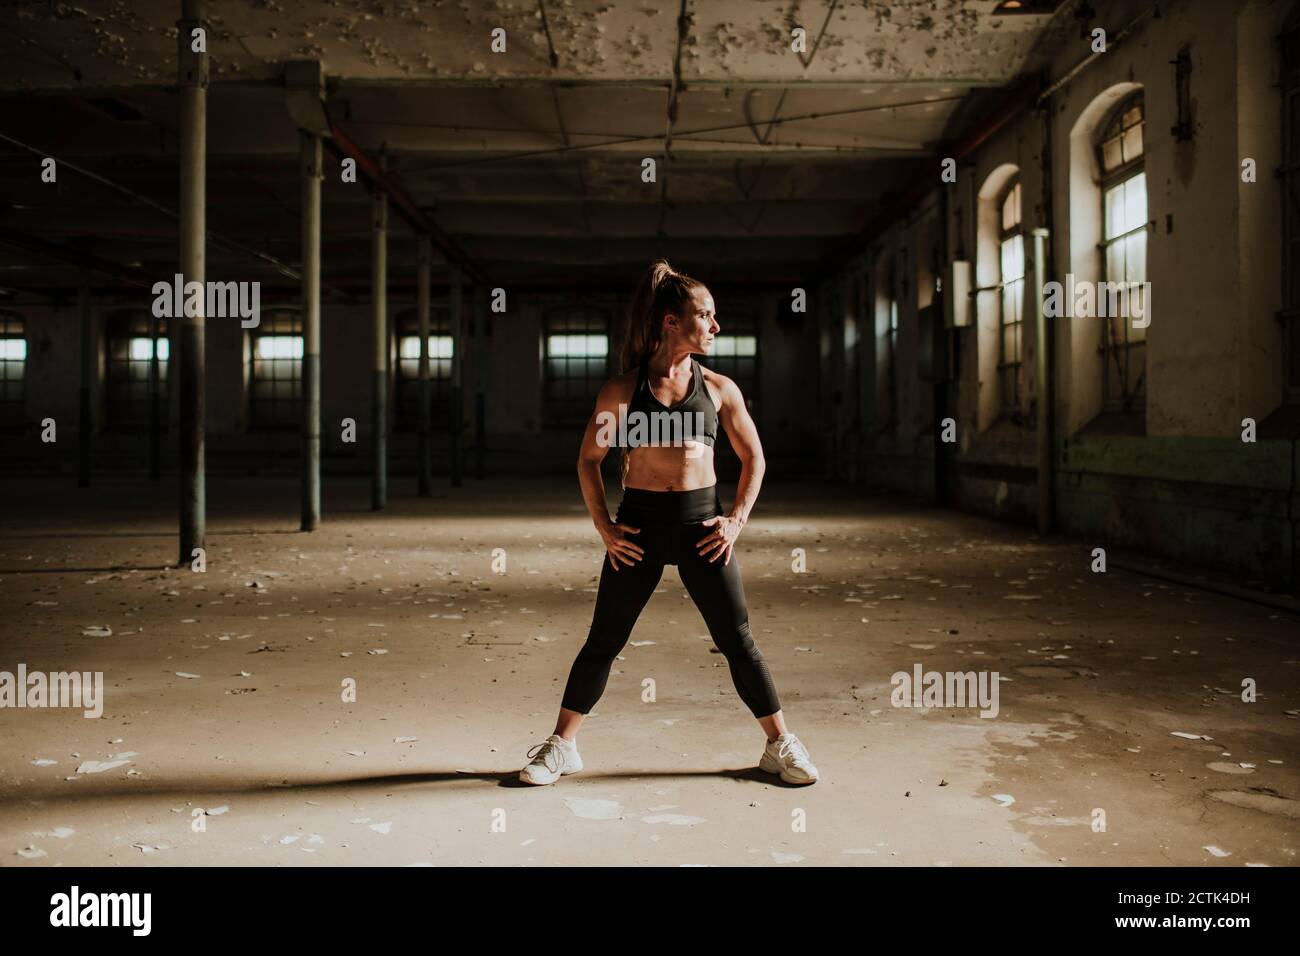 Muscular build woman standing with hand on hip at abandoned factory Stock Photo